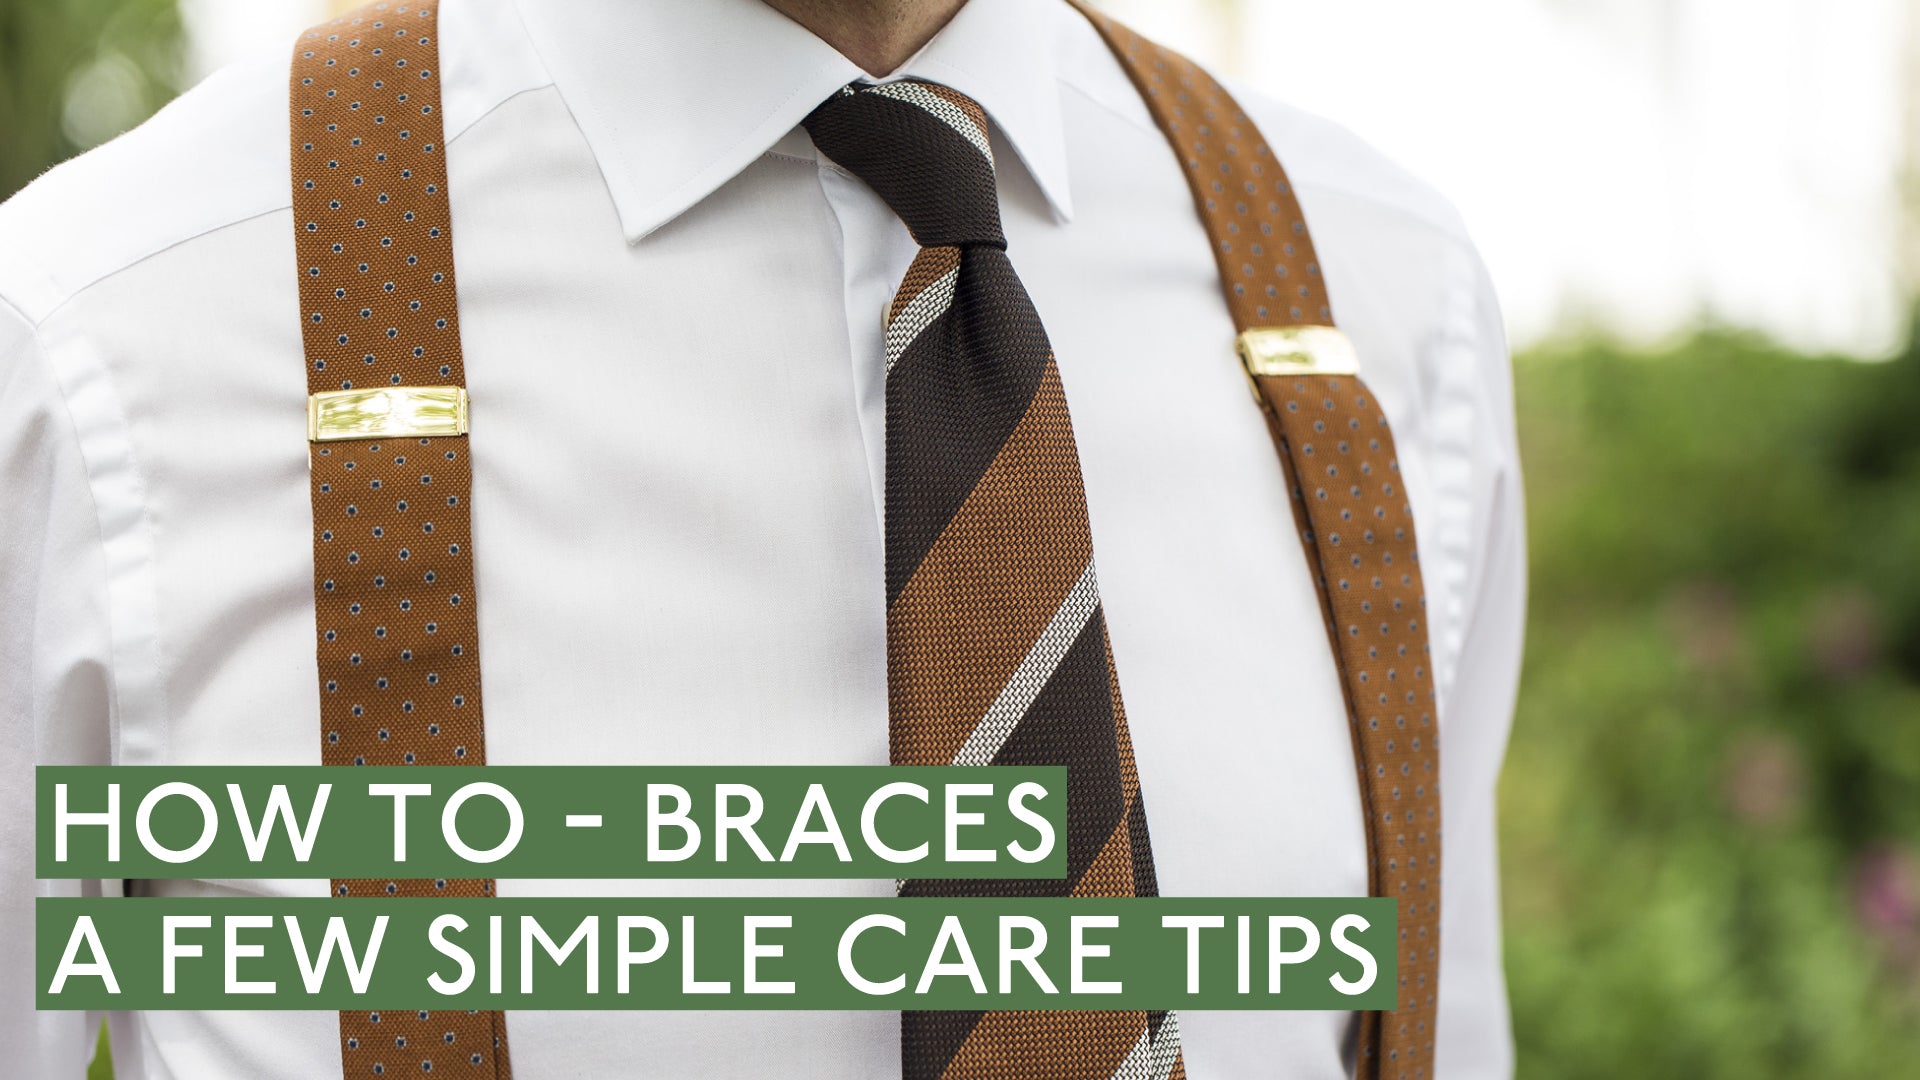 How To - Care Tips For Your Braces & Suspenders